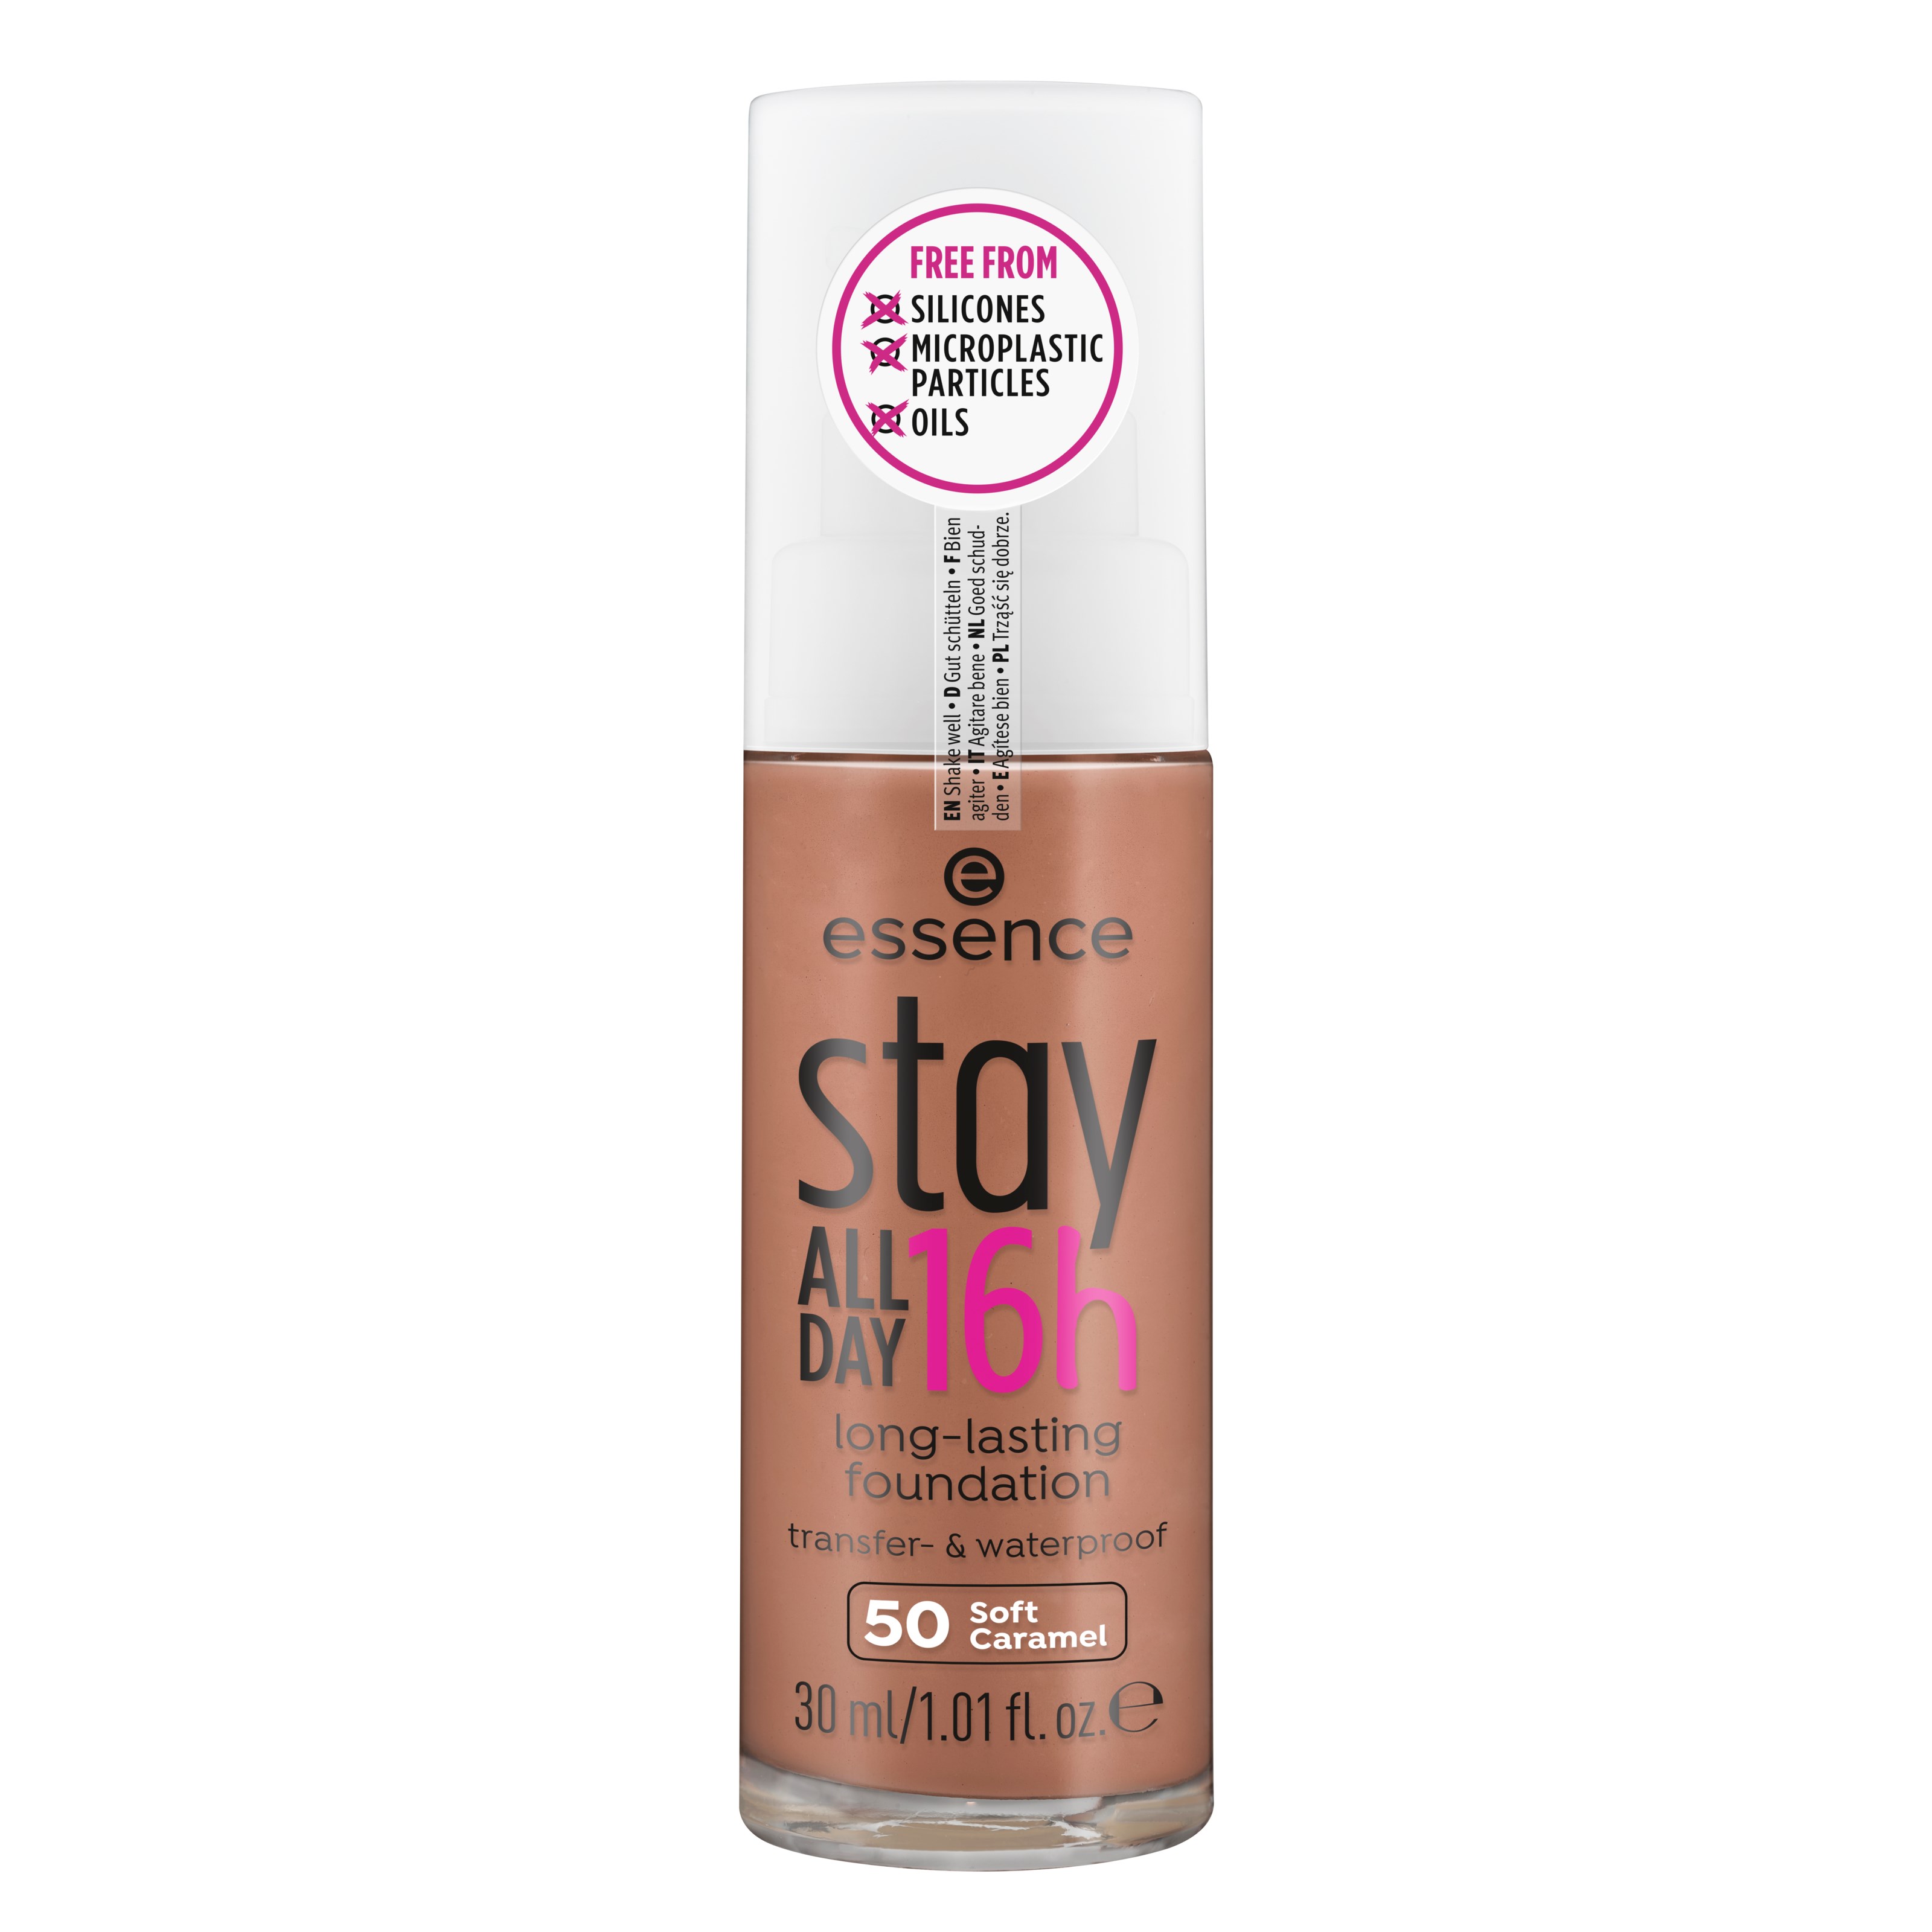 essence stay ALL DAY 16h long-lasting foundation 50 Soft Caramel